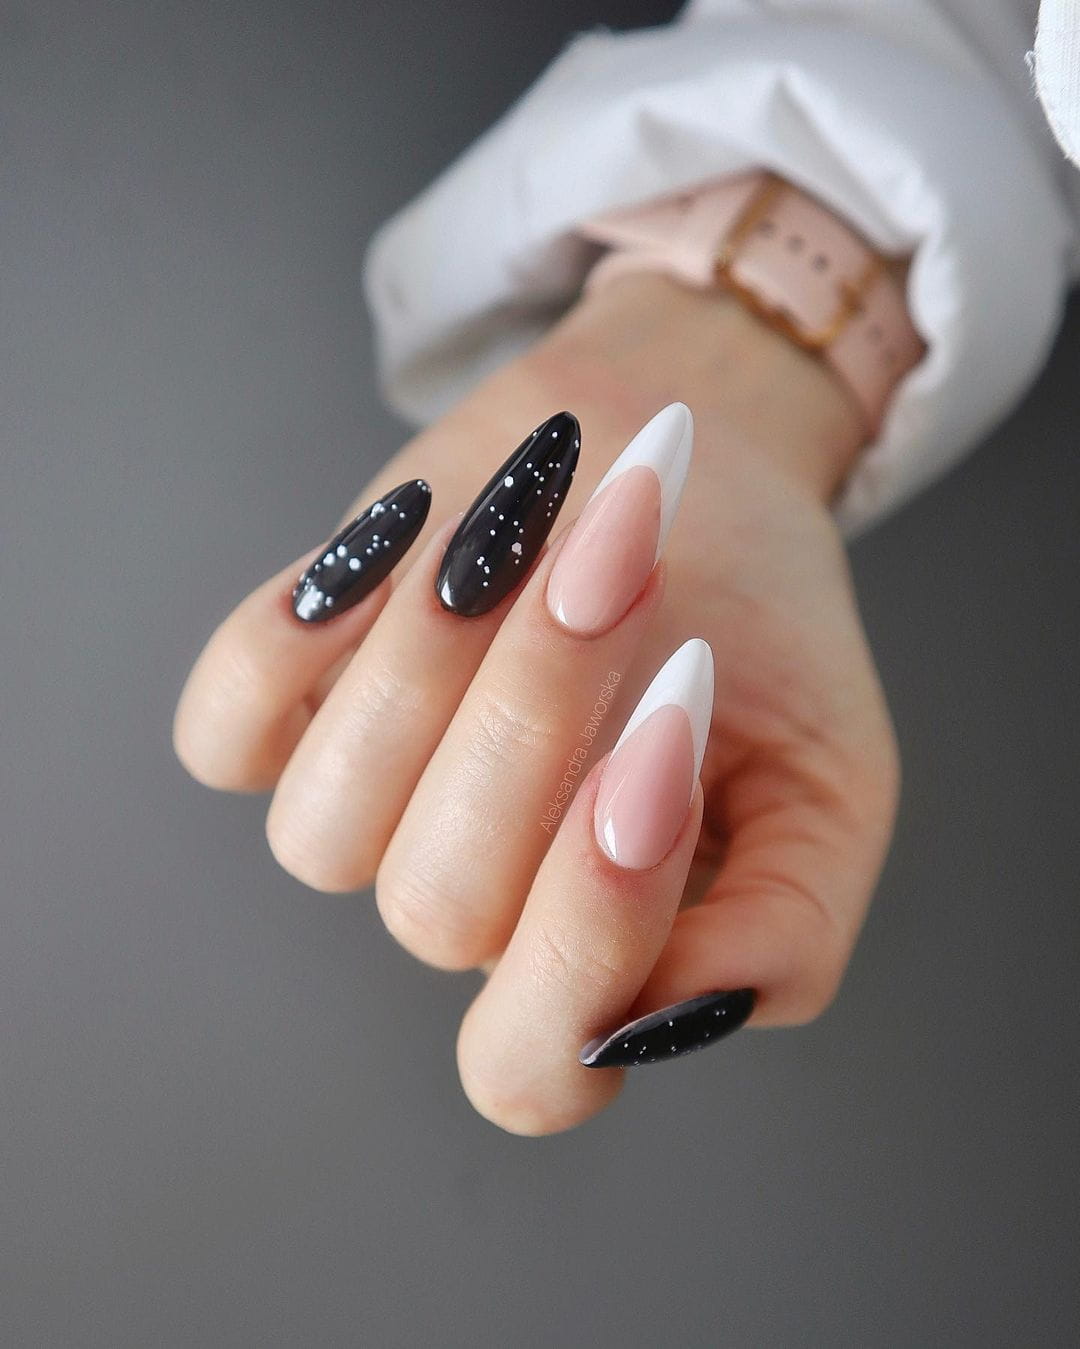 100+ Trendy And Cute Fall Nail Designs To Inspire You This Autumn In 2023 images 26